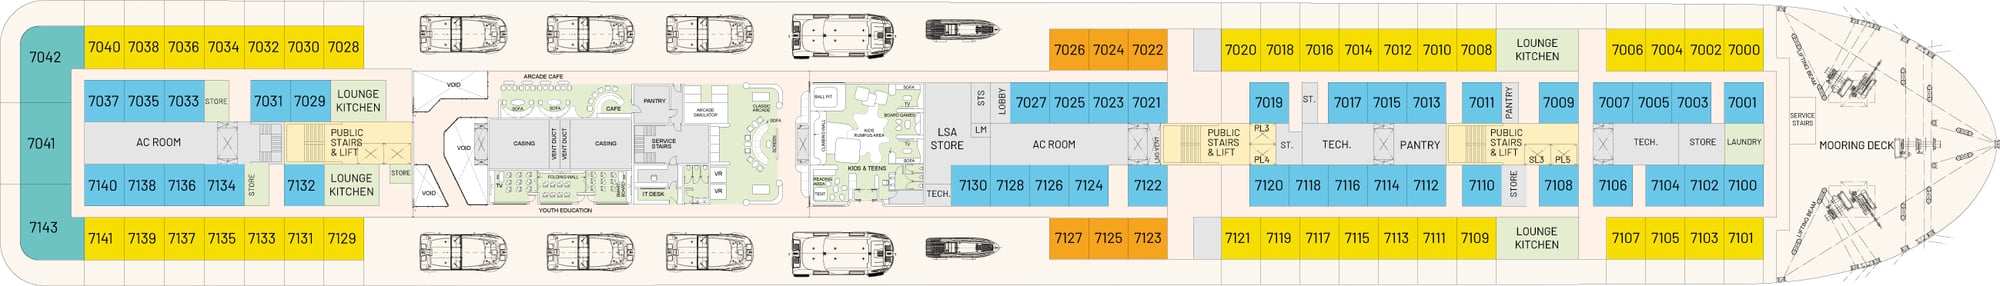 Floorplan of Deck 7 showing the location of the condo's on the cruise ship